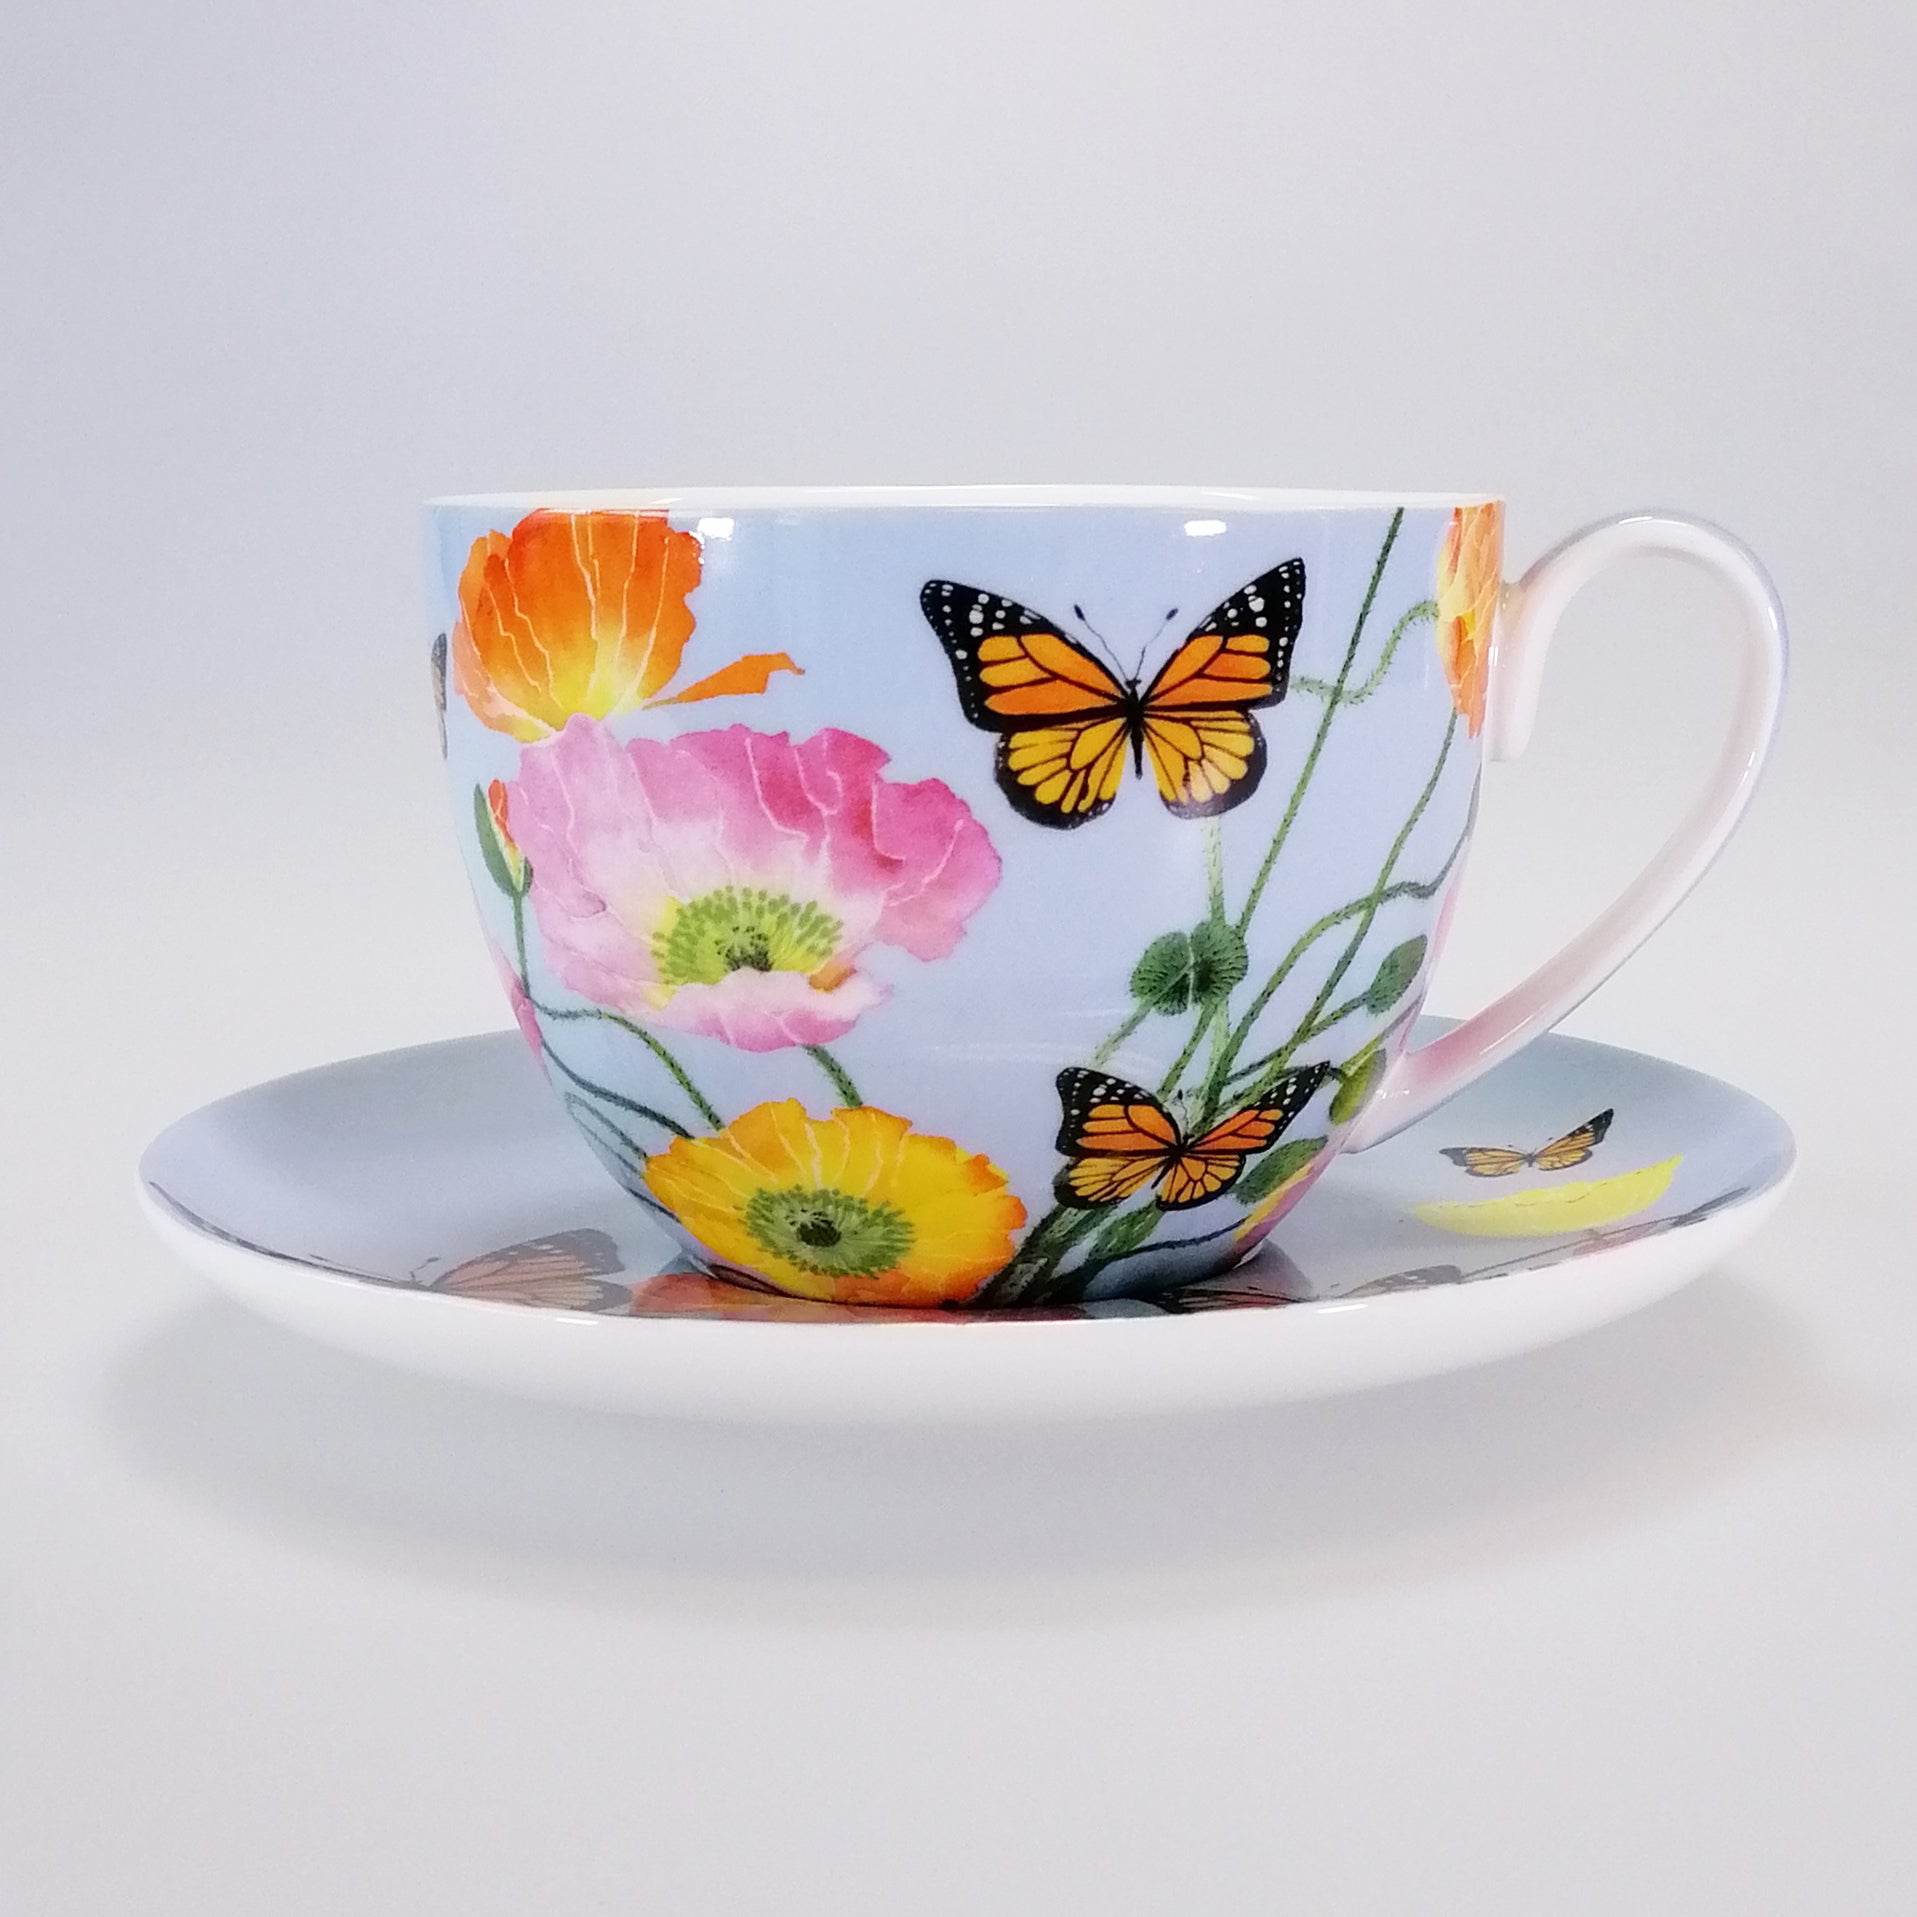 Posey Breakfast Cup & Saucer - Poppies